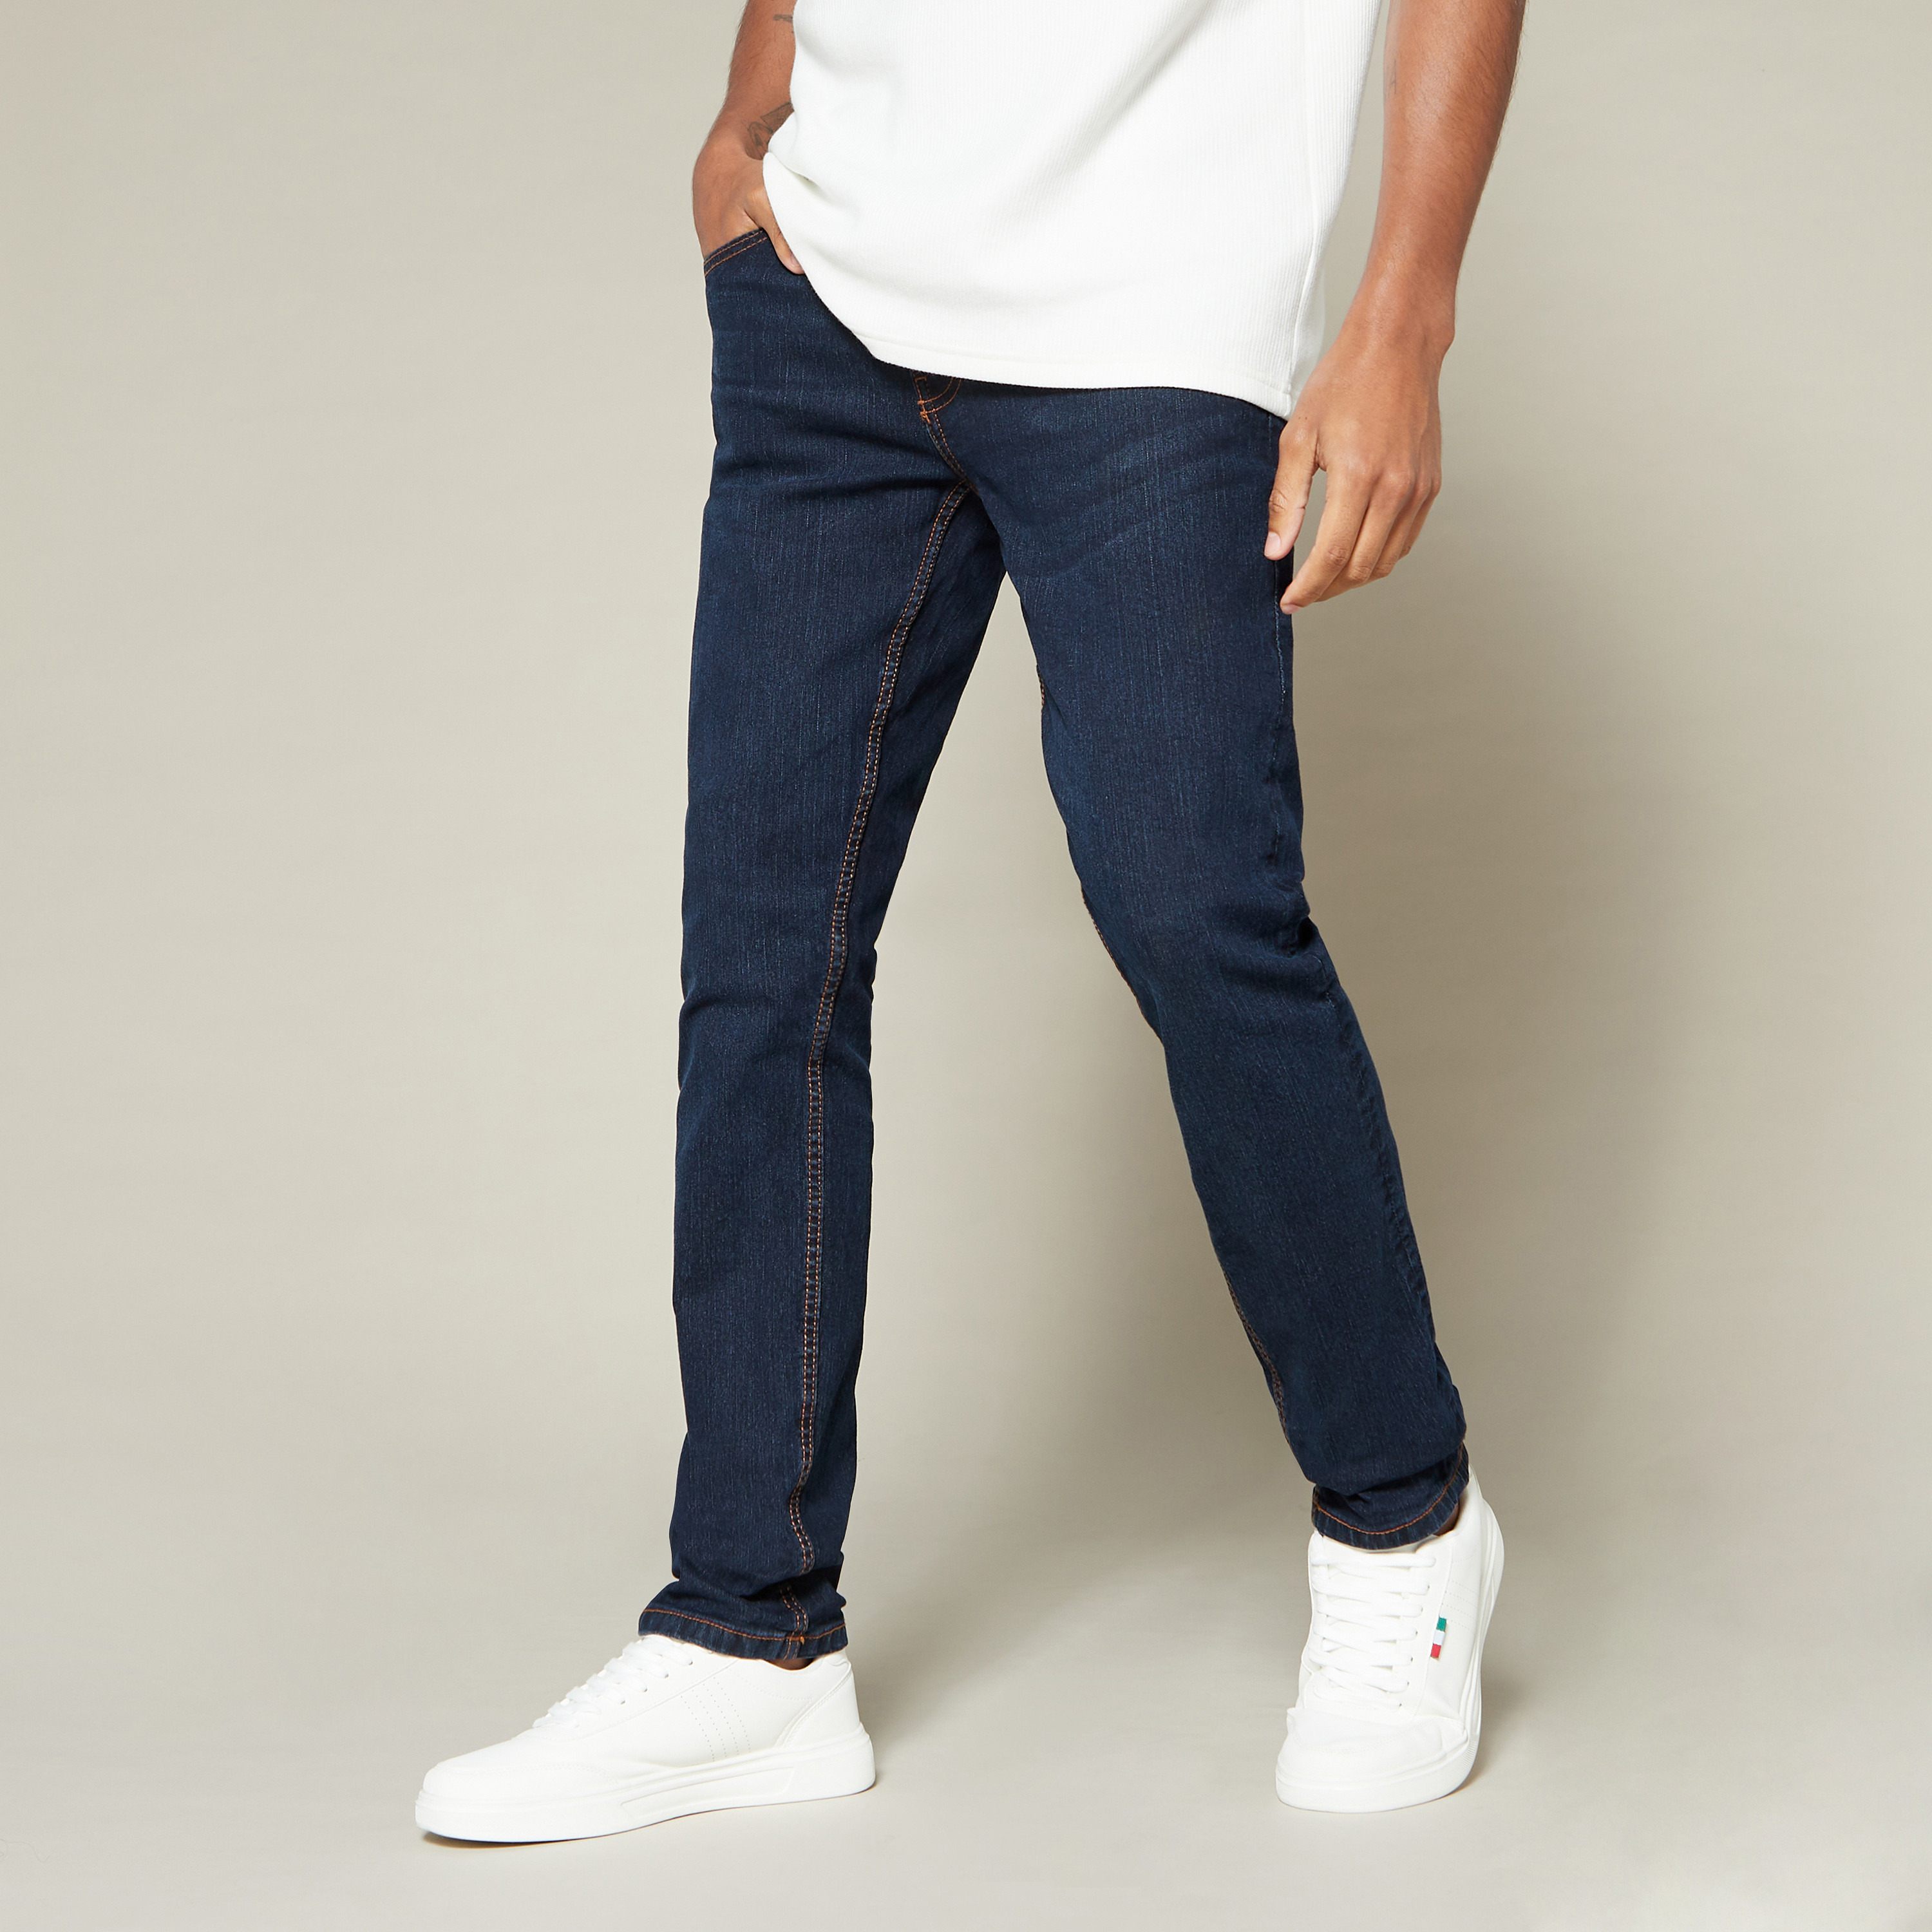 True Religion Rocco Slim Fit Jean | Urban Outfitters Mexico - Clothing,  Music, Home & Accessories